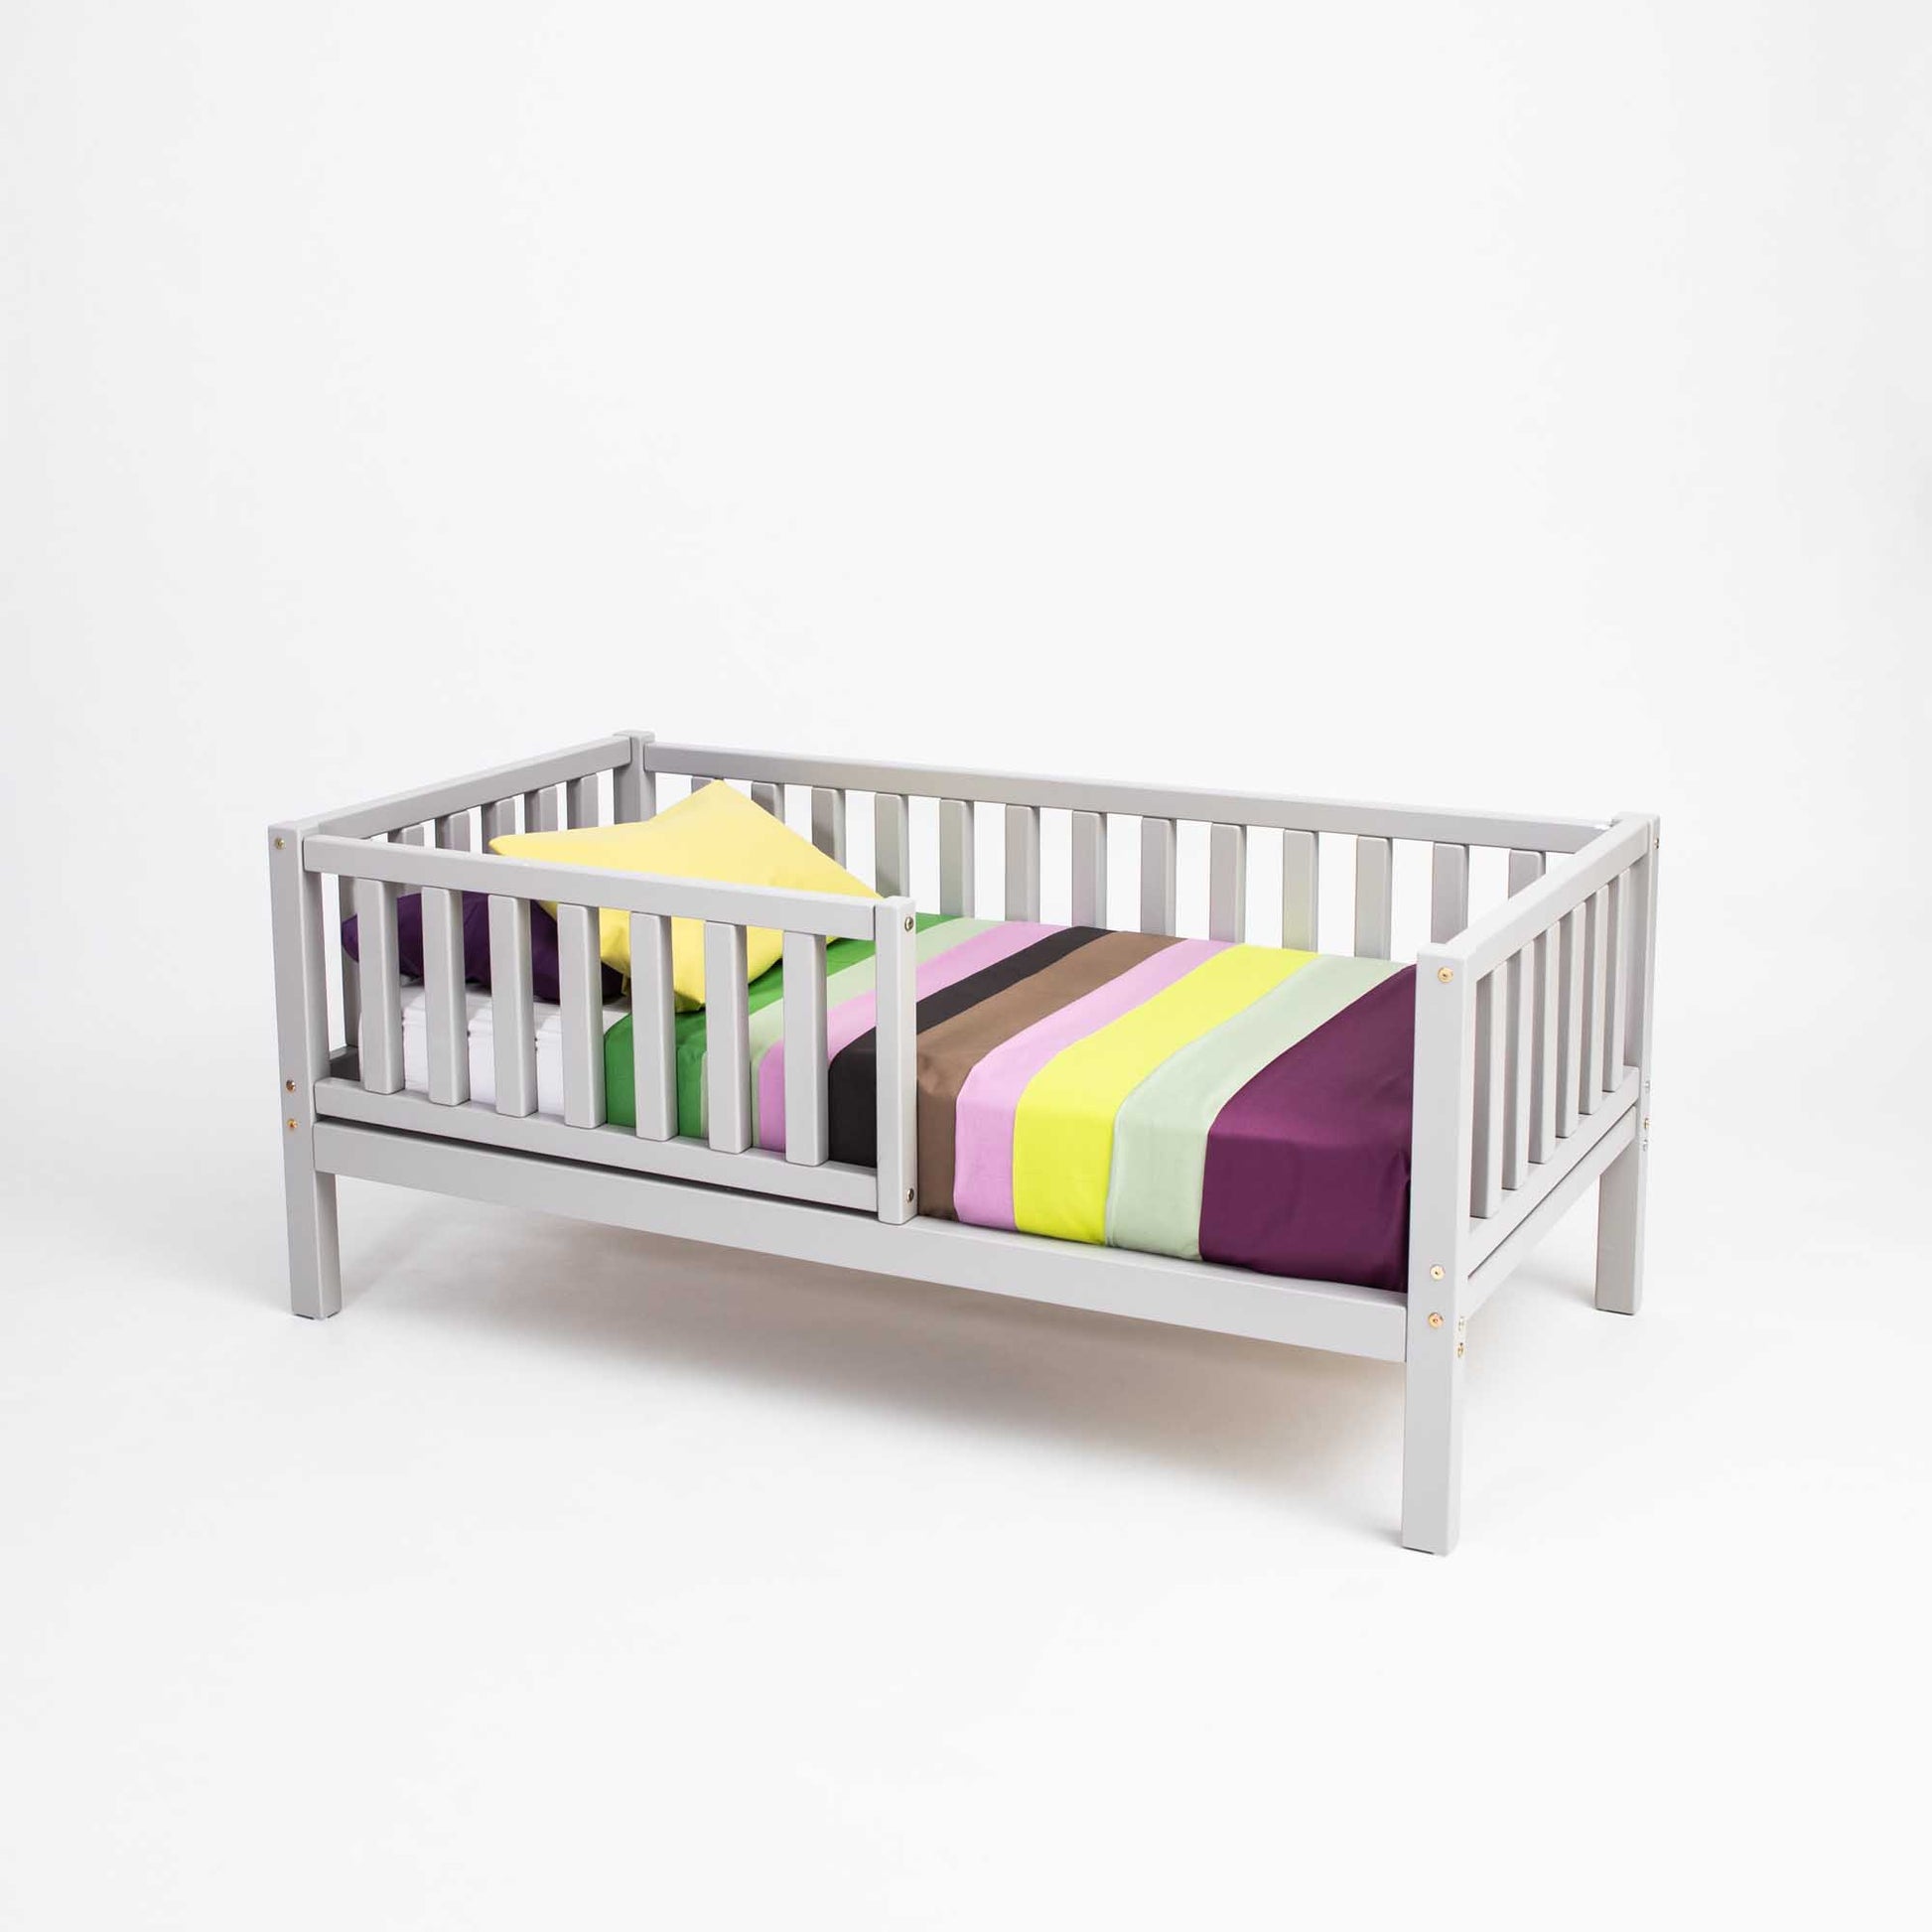 A 2-in-1 toddler bed on legs with a vertical rail fence from Sweet Home From Wood, with a long-lasting, colorful striped sheet.